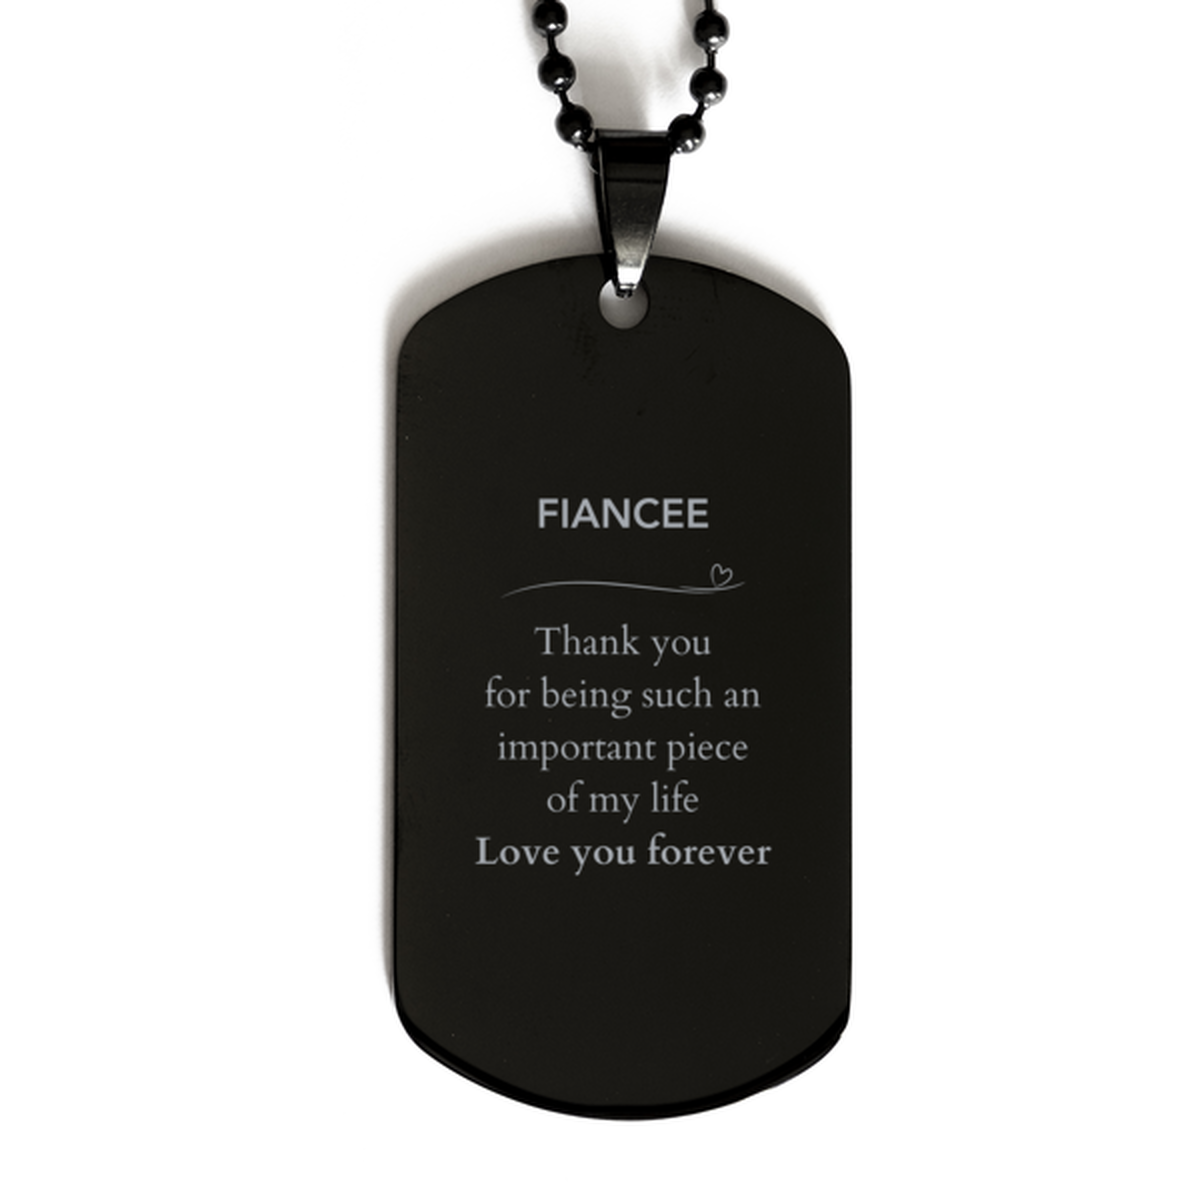 Appropriate Fiancee Black Dog Tag Epic Birthday Gifts for Fiancee Thank you for being such an important piece of my life Fiancee Christmas Mothers Fathers Day